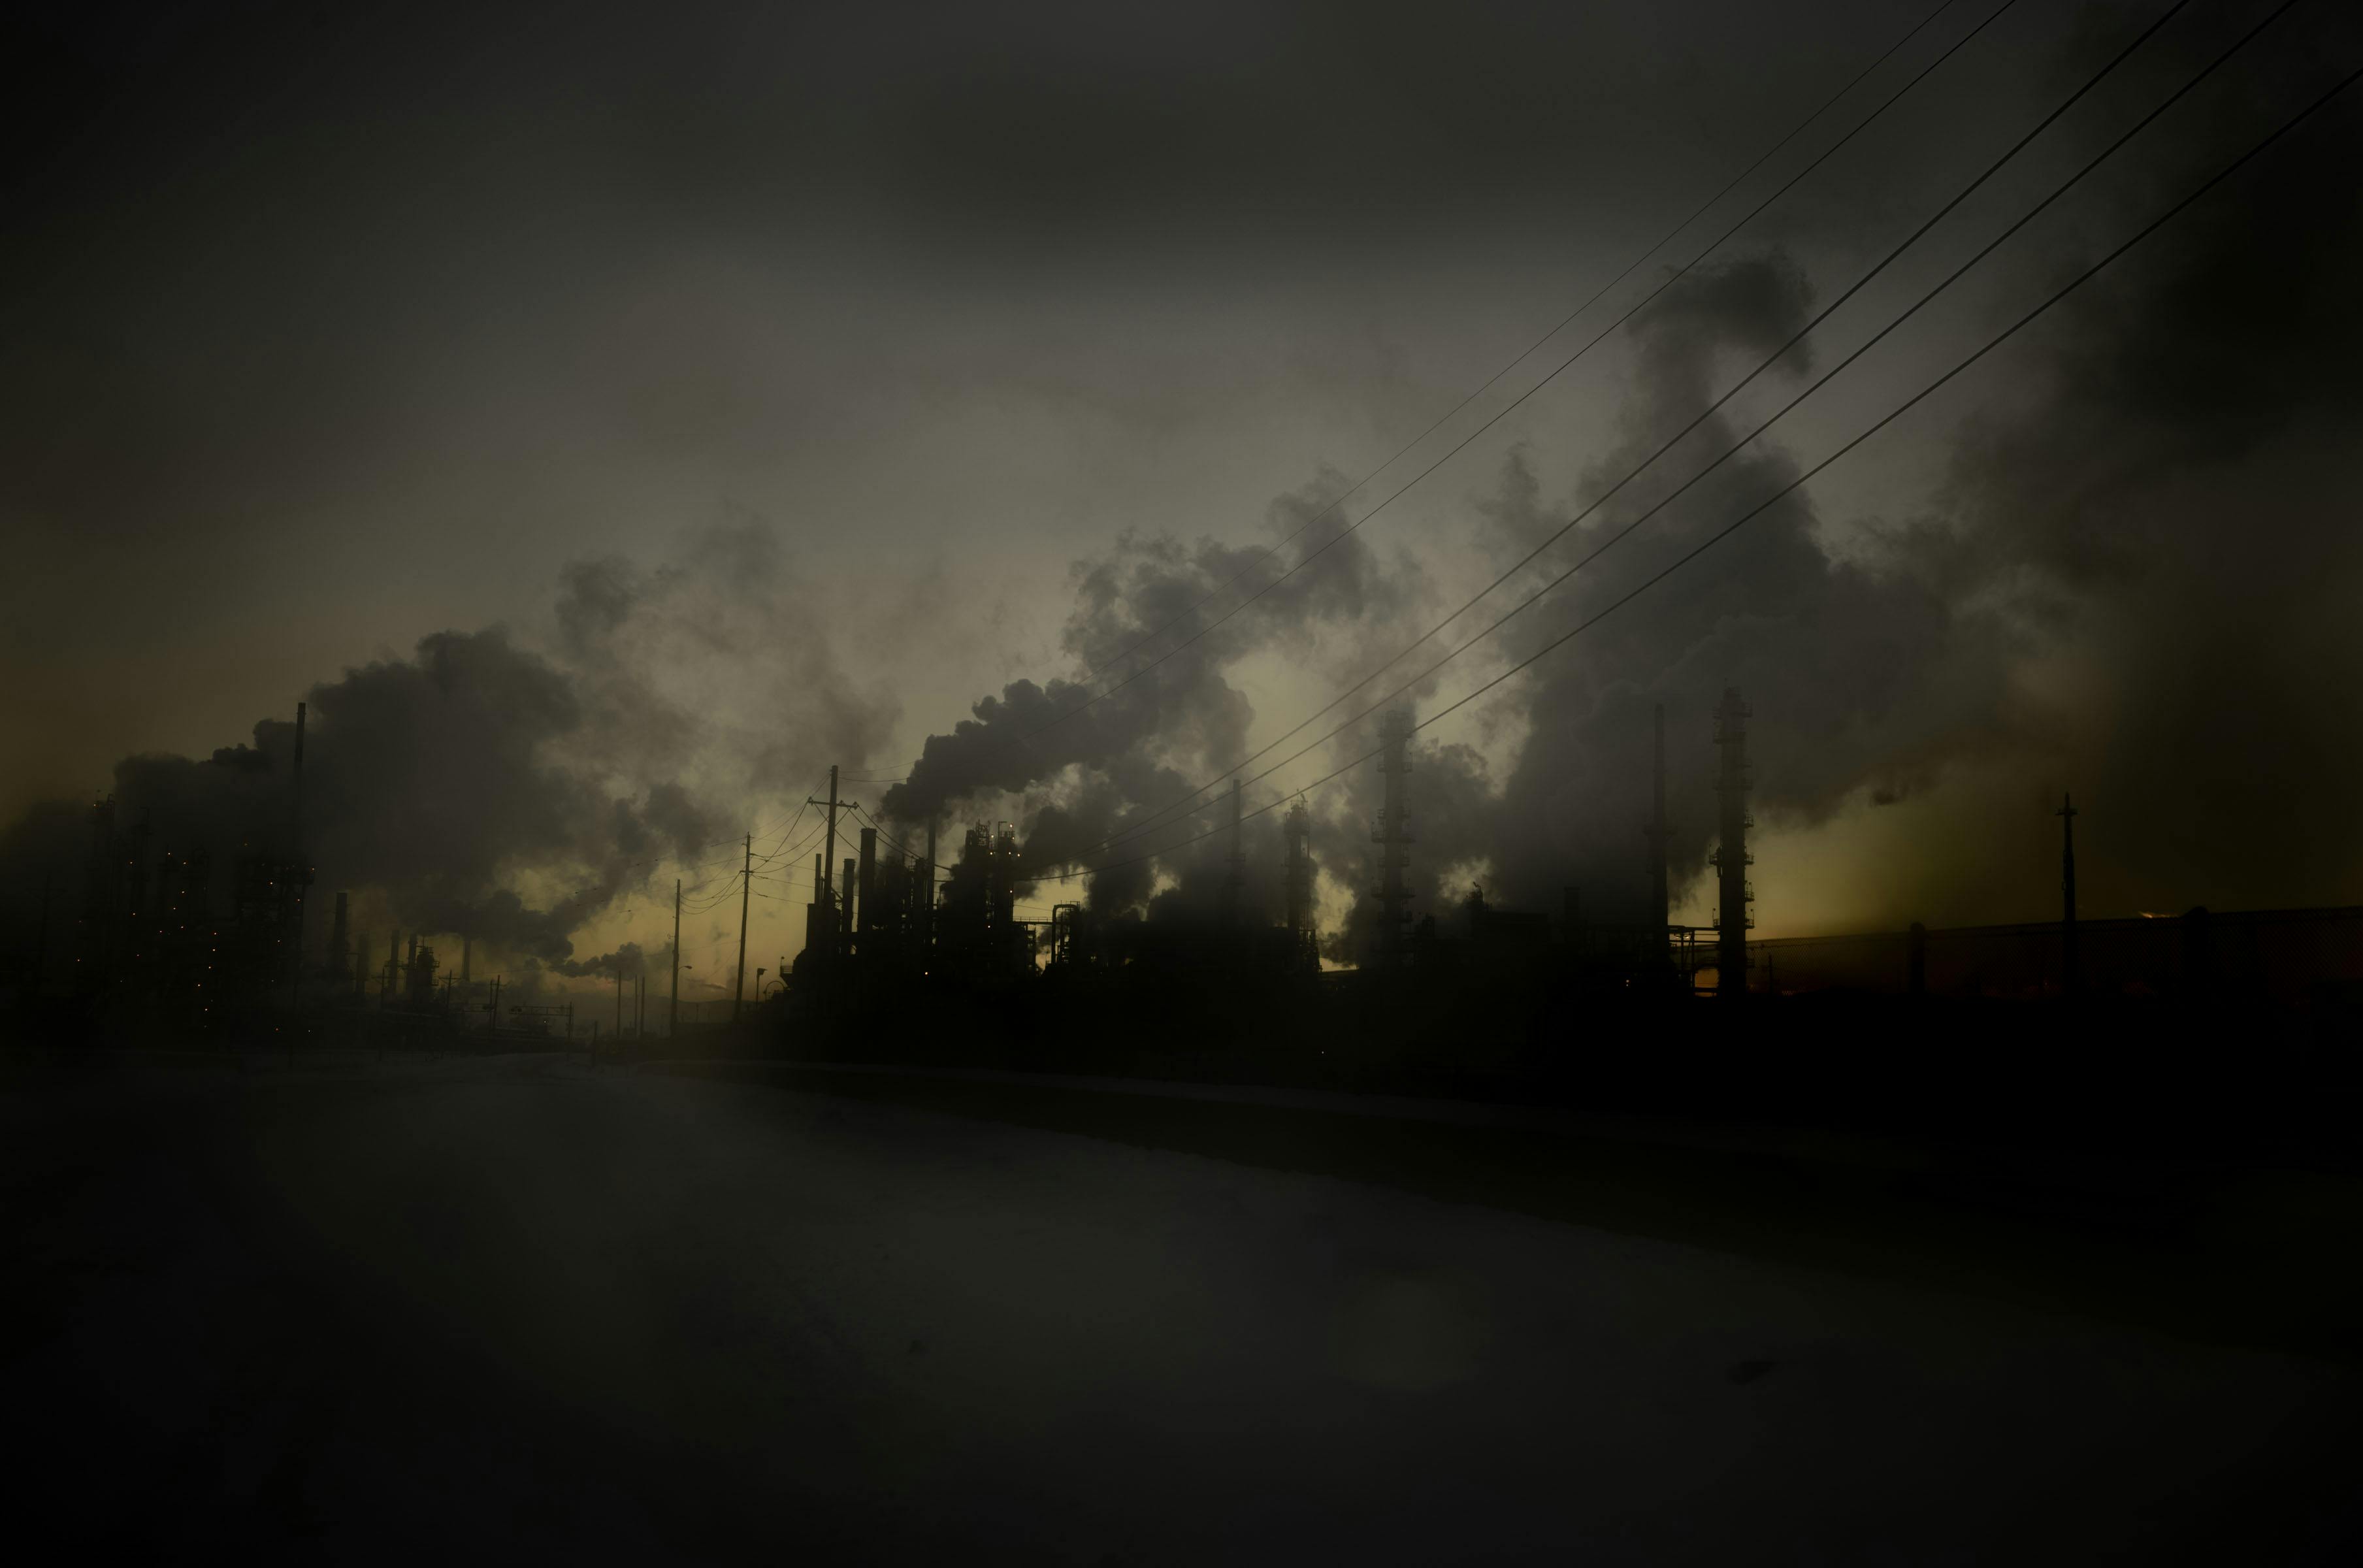 The Black Mechanism #32 by Todd Hido, Obscura Curated Commission.